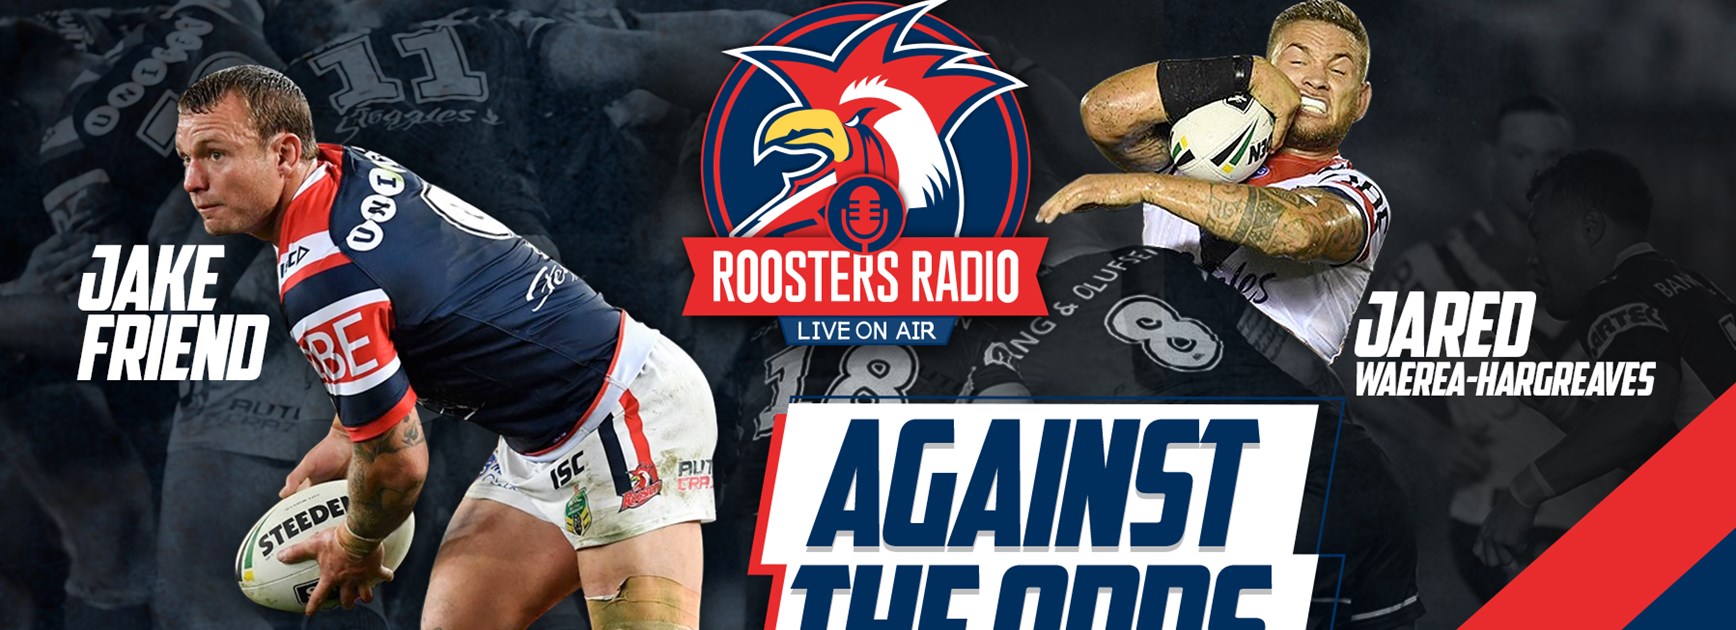 Roosters Radio | The Leaders